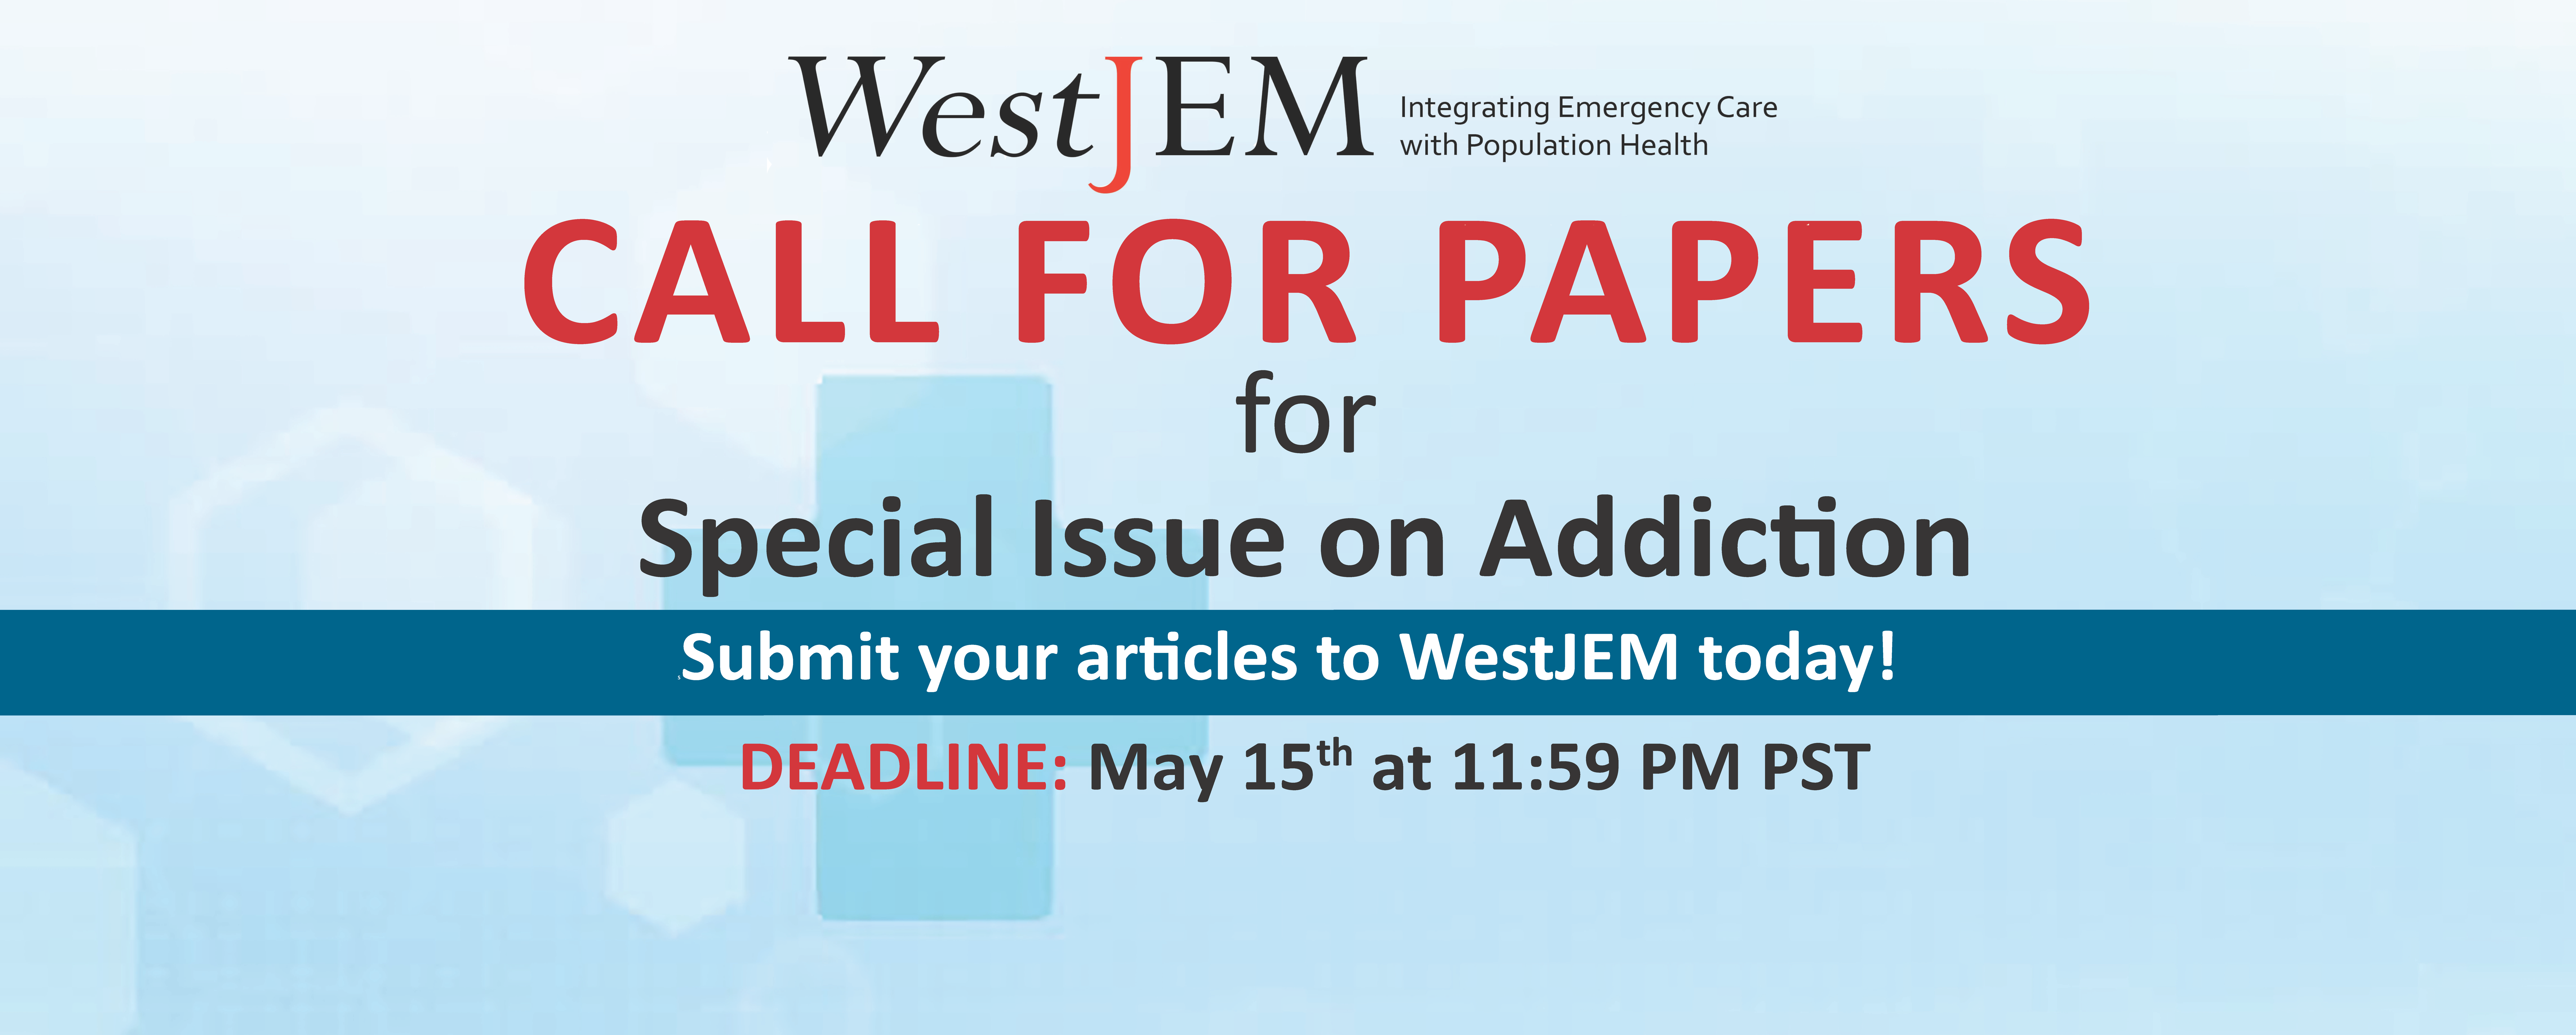 Call for Papers for Special Issue on Addiction Banner